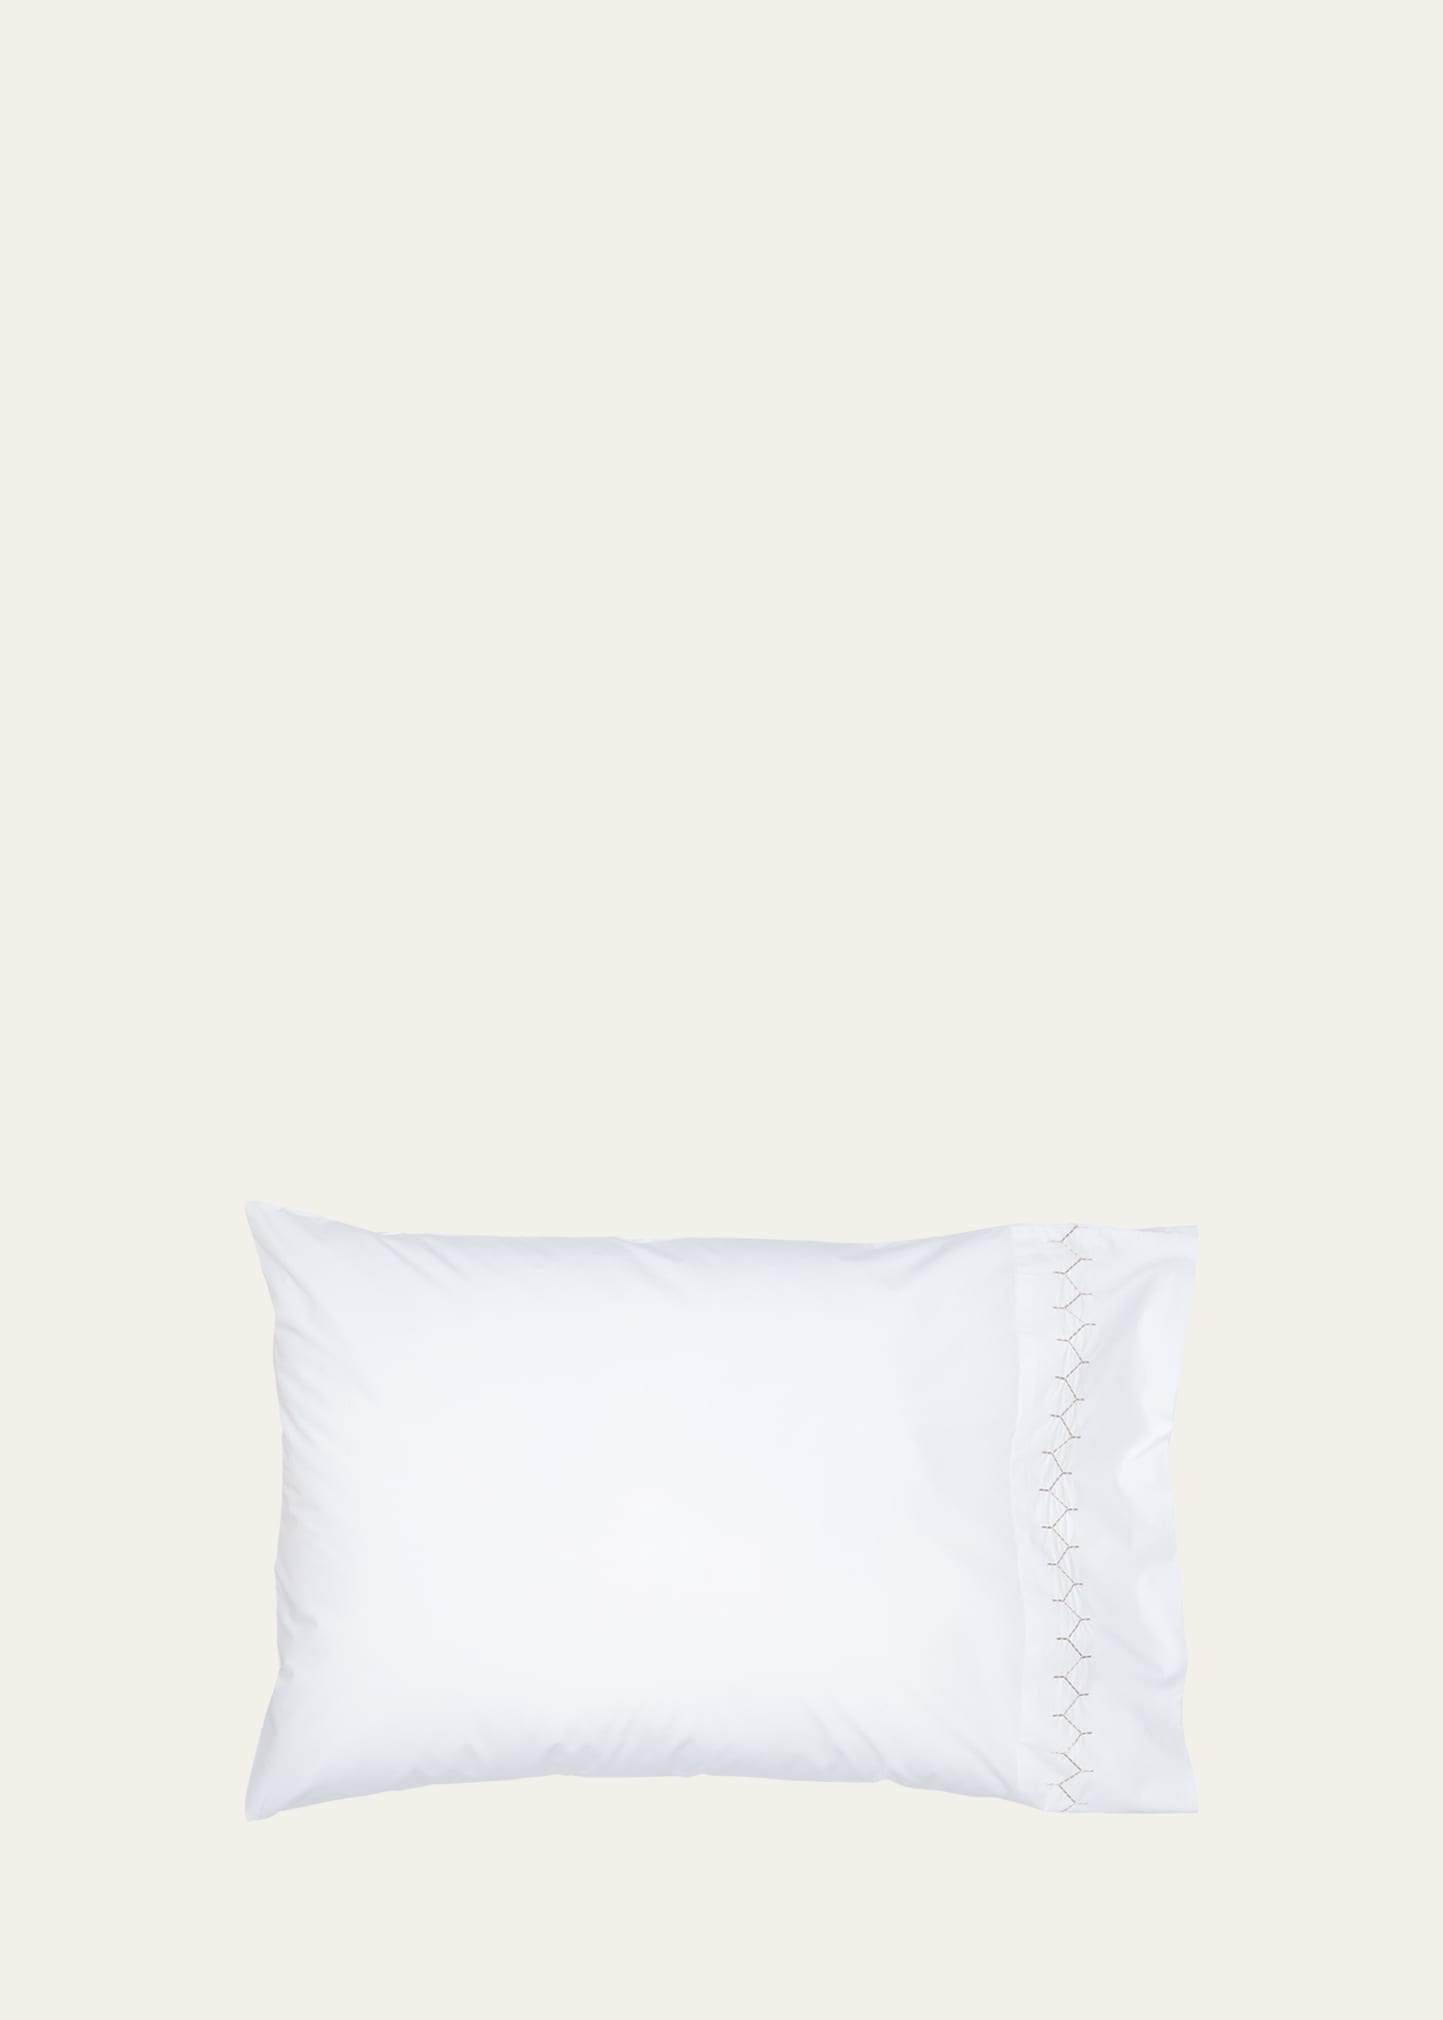 Stitched 300 Thread Count Standard Pillowcases, Set of 2